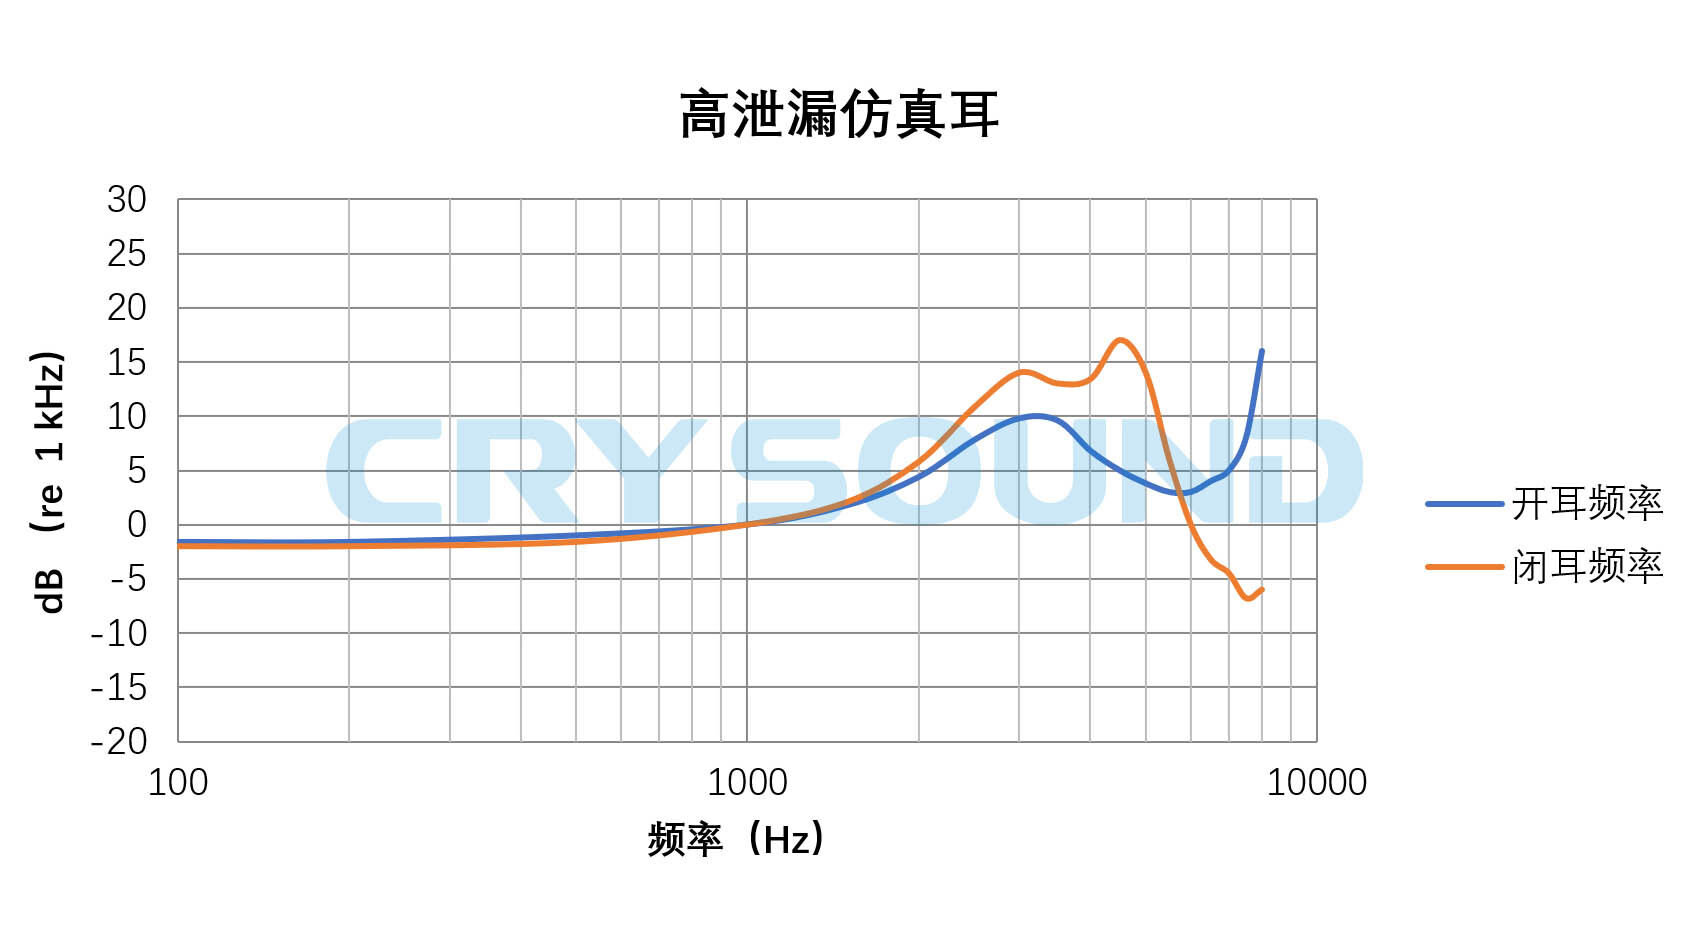 CRY712 typical acoustic impedance curve